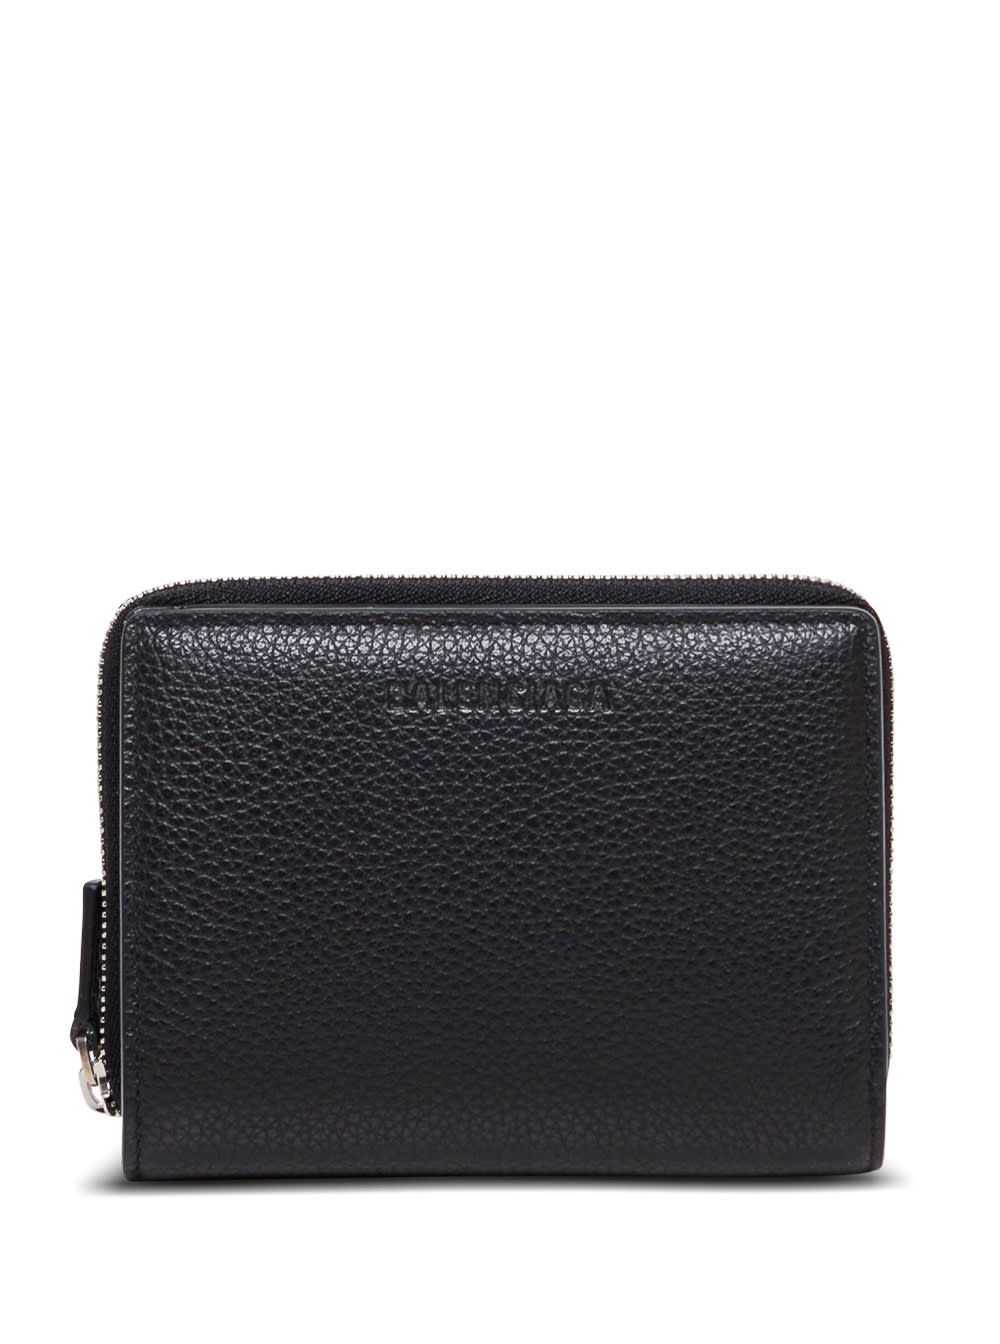 Balenciaga Essential Wallet In Black Hammered Leather